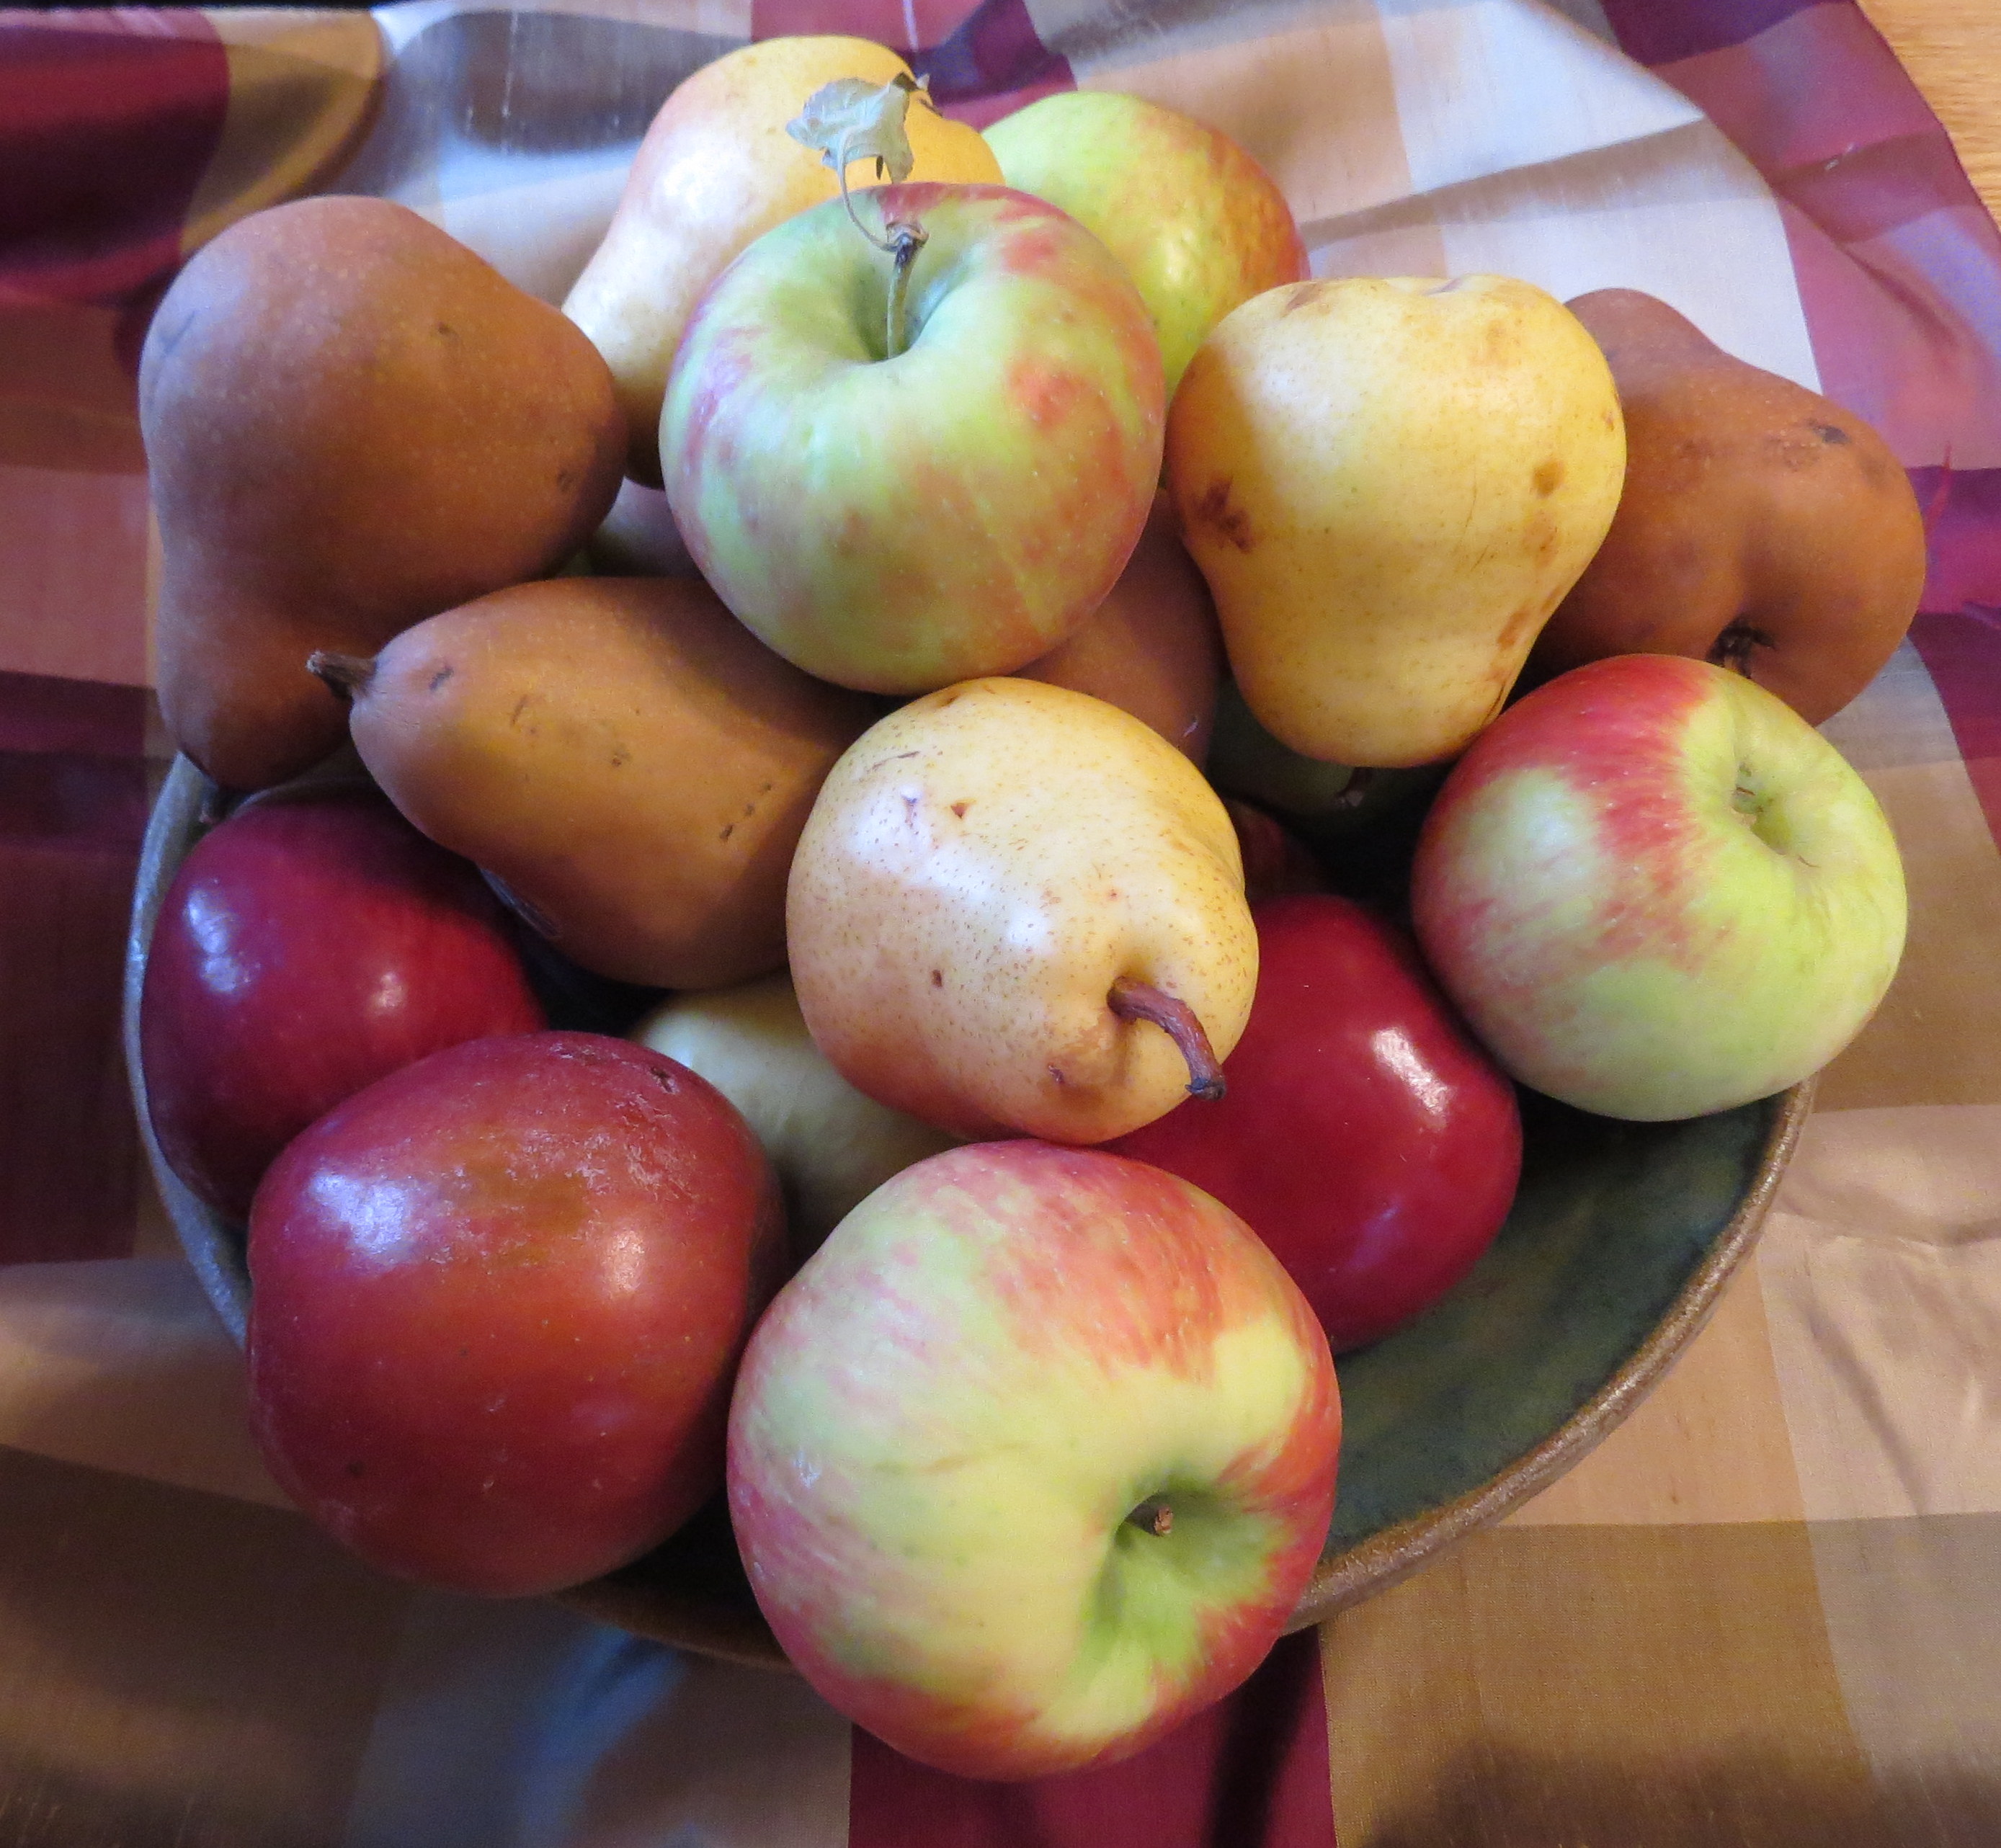 Apples and Pears in a Bowl